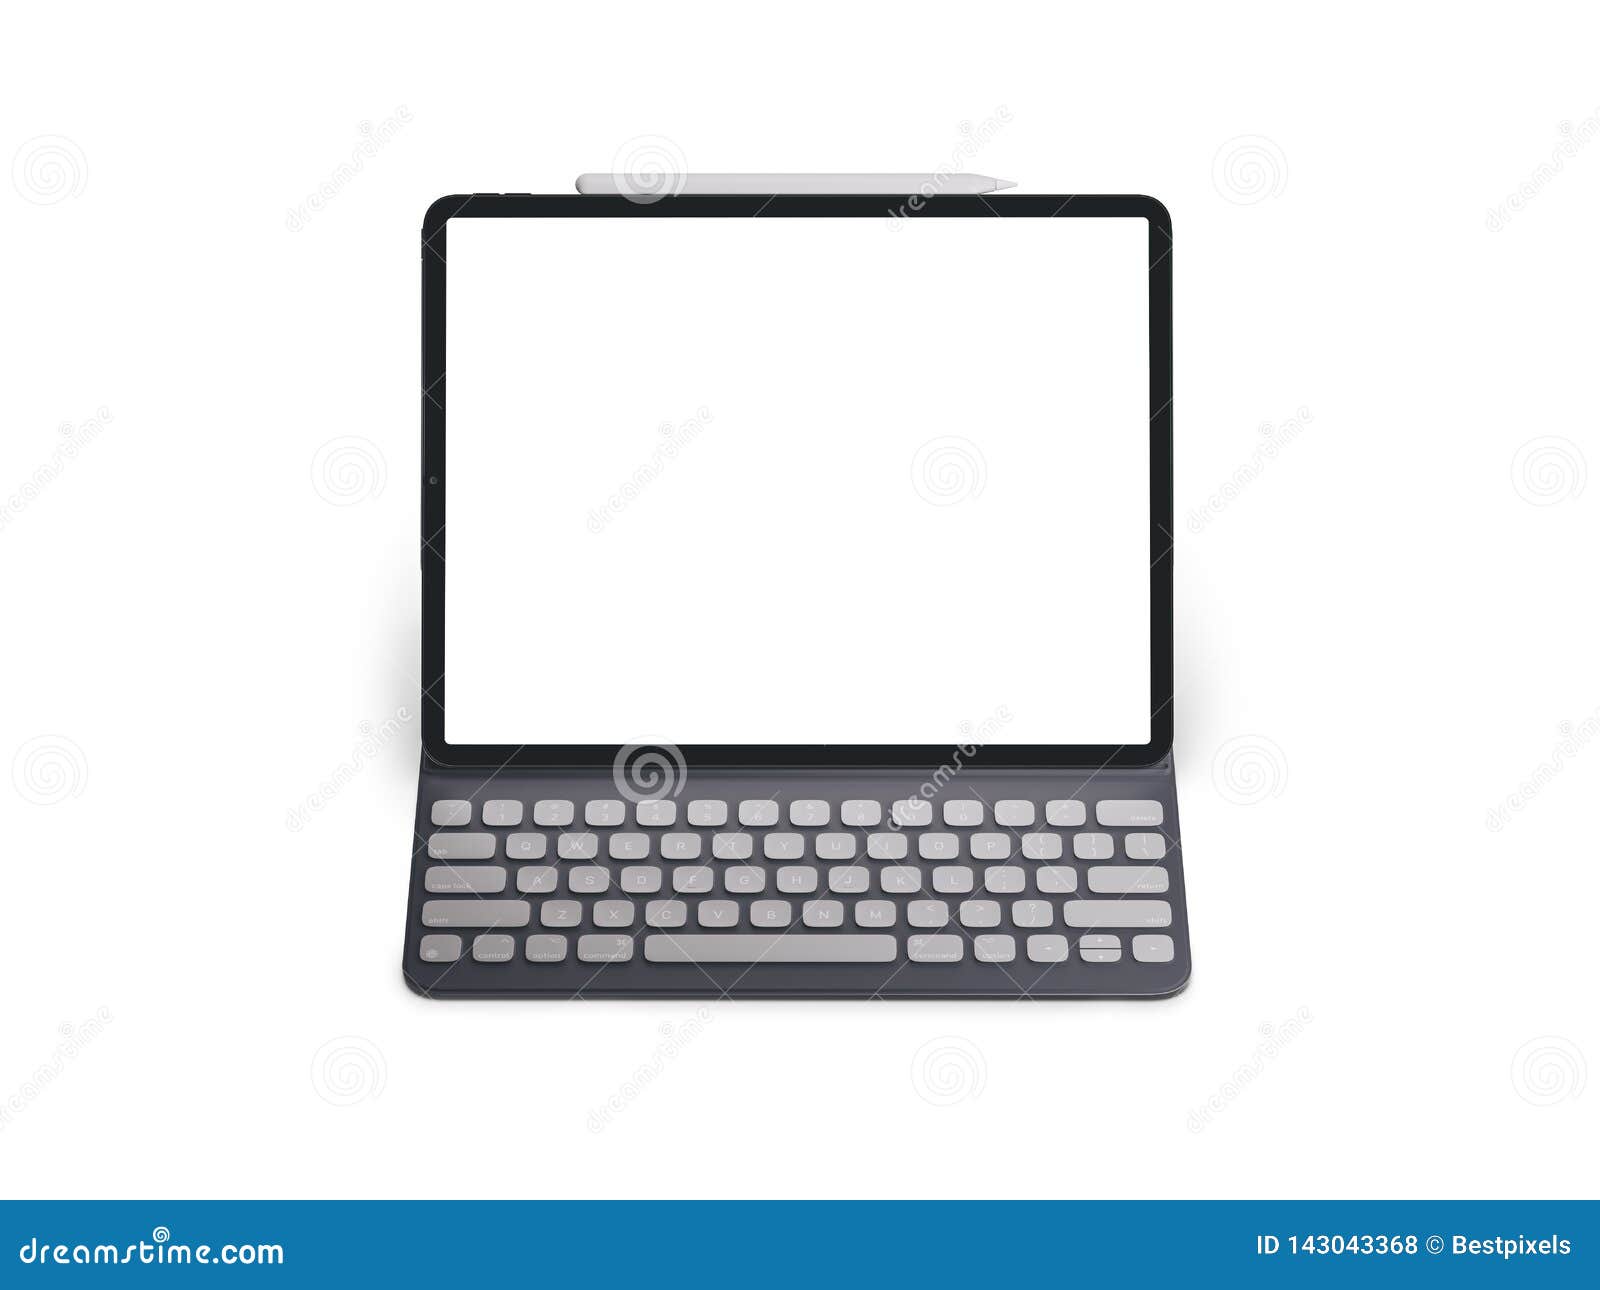 blank screen tablet on white background.  ipad.